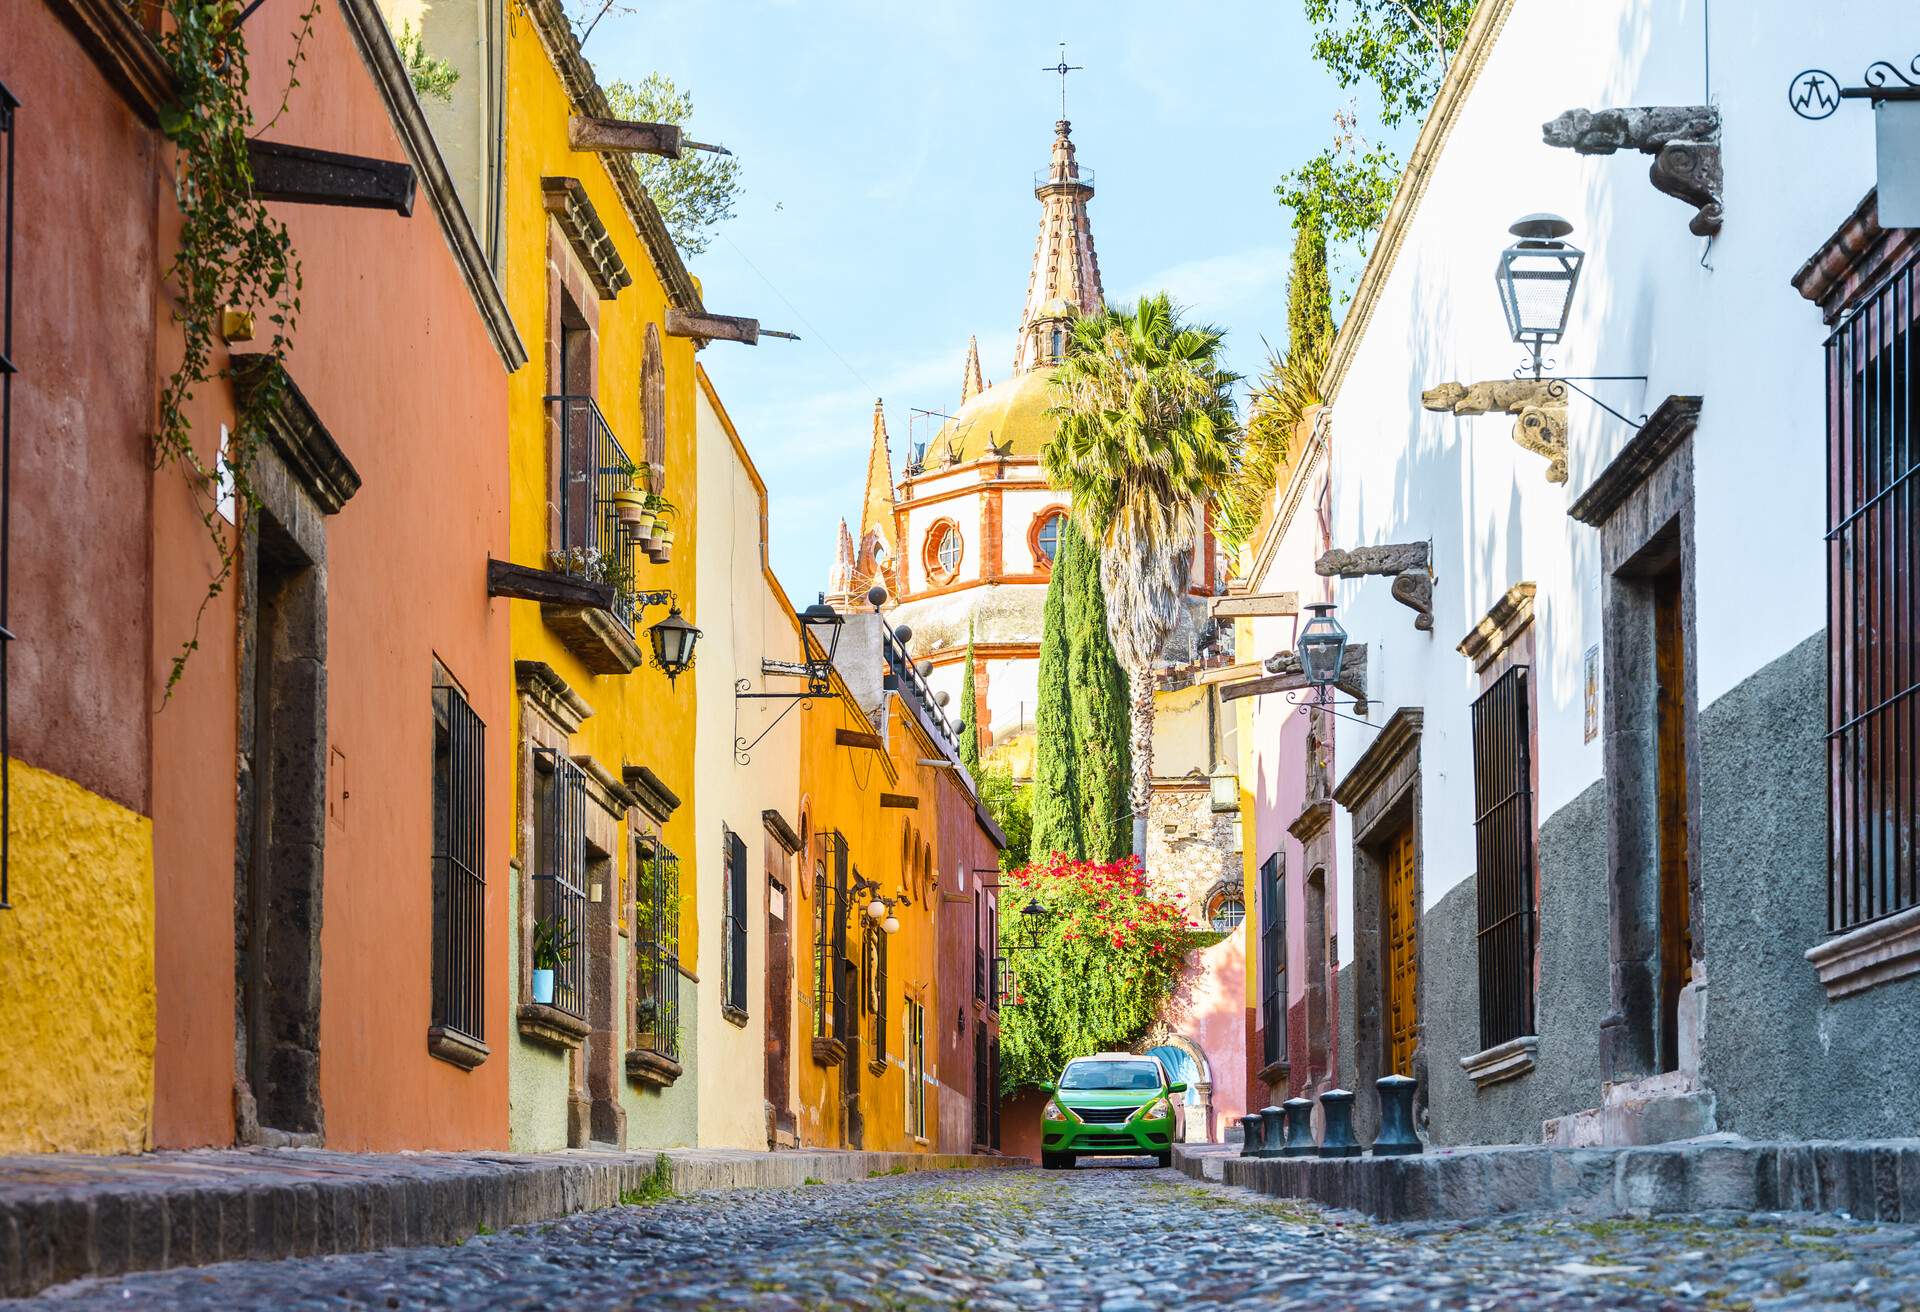 STREET VIEW OF COLOURFUL COLONIAL STREET IN SAN MIGUEL DE ALLENDE, MEXICO